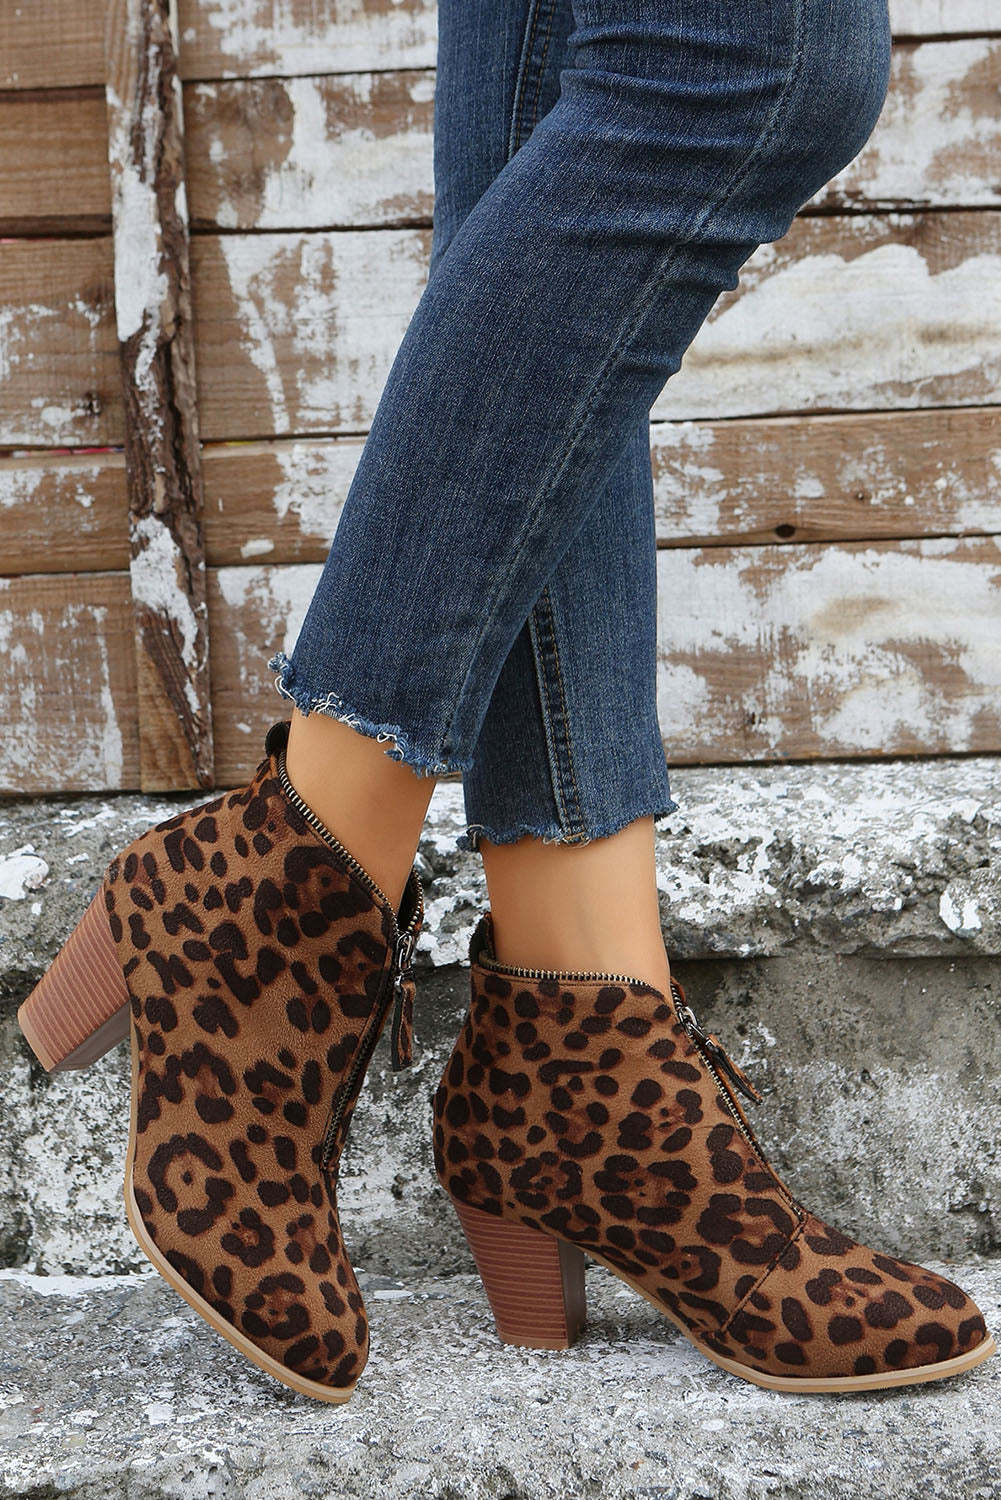 LEOPARD CASUAL OUTDOOR POINTED TOE HIGH HEELS BOOTS